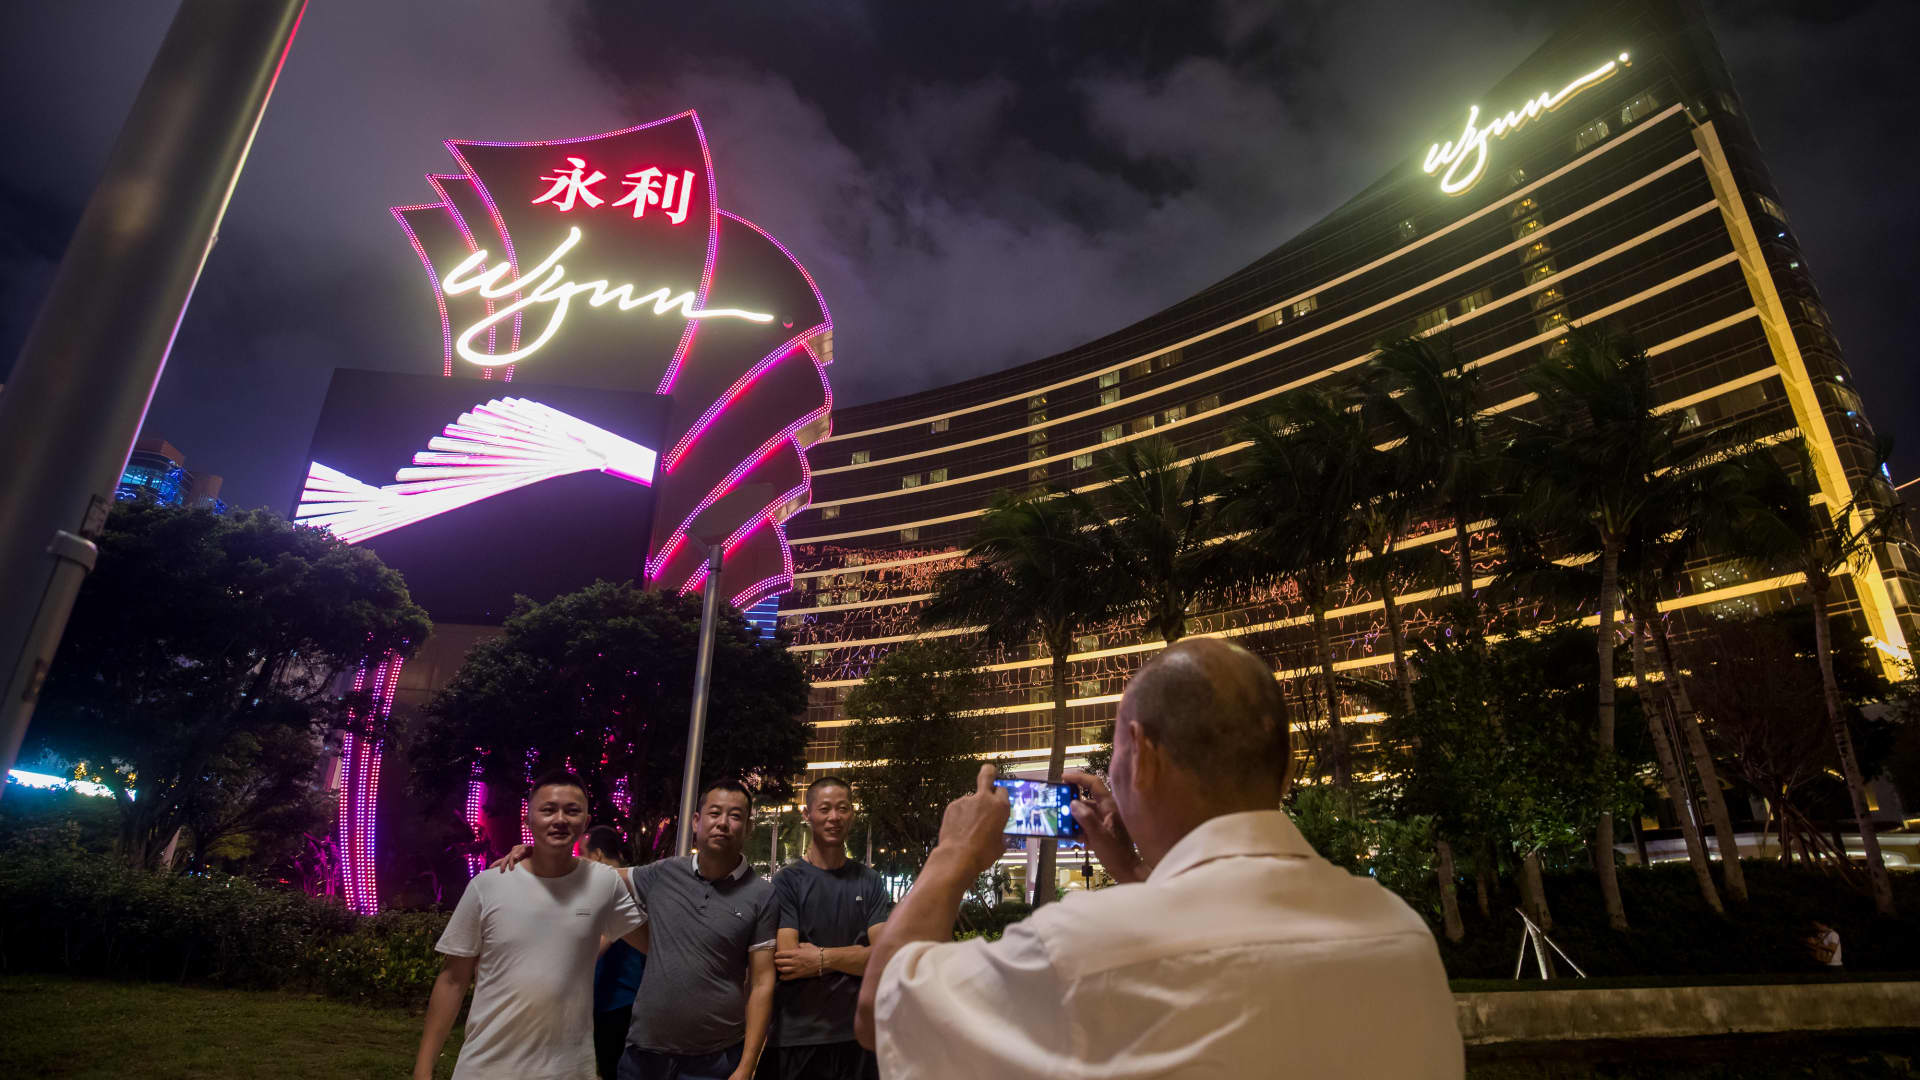 We agree with Wells Fargo that Wynn is set for a comeback as gamblers return to Macao